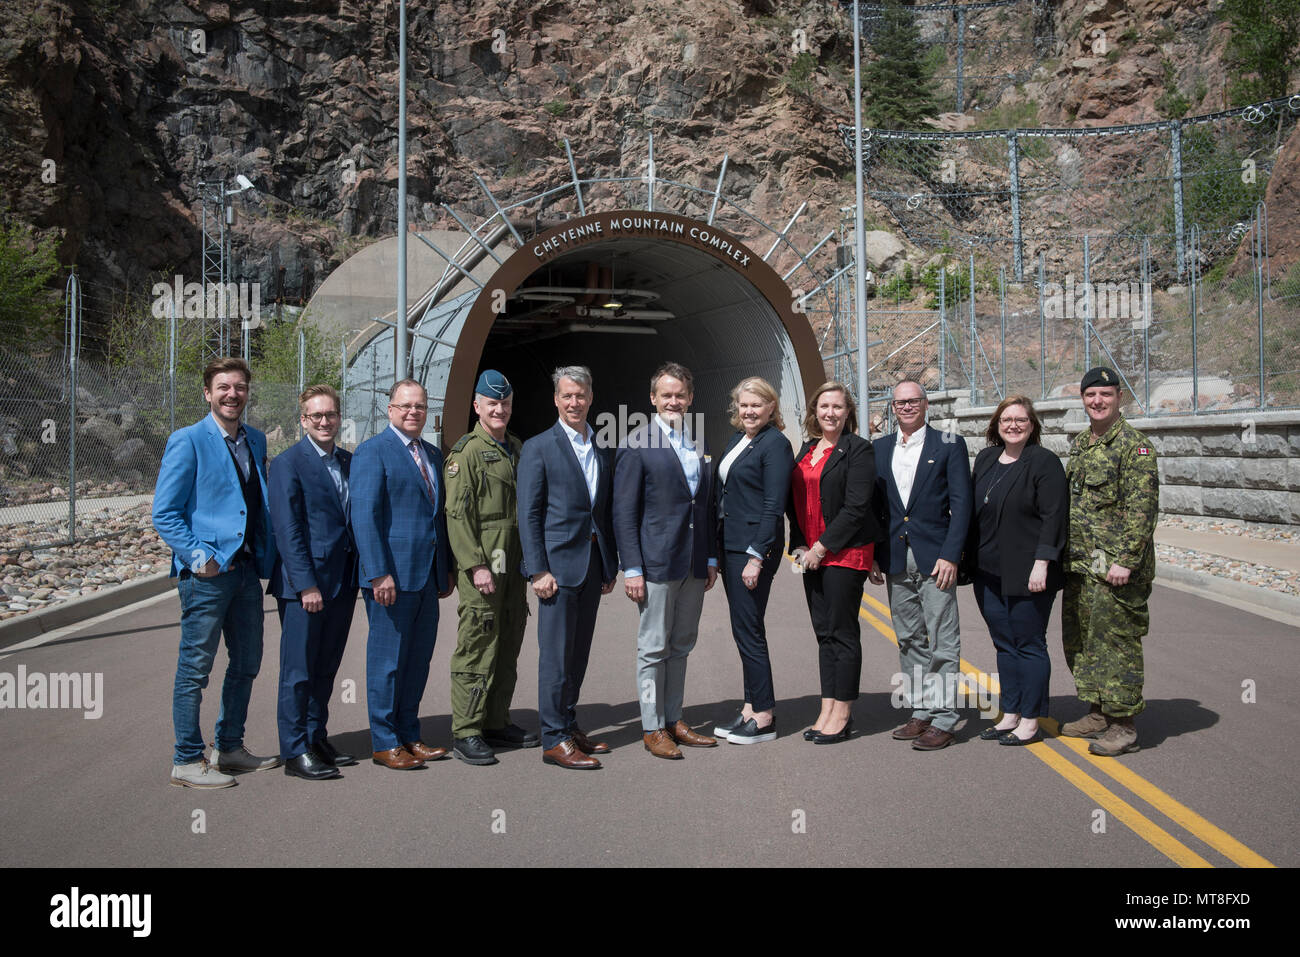 CHEYENNE MOUNTAIN AIR FORCE STATION, Colo.—The Honourable Seamus O’Regan (center), Canadian minister of veteran affairs, The Honourable Andrew Leslie (center left), Canadian parliamentary secretary to the minister of foreign affairs, Jody Thomas (center right), deputy minister of national defence, and Stephane Lessard (third from left), consul general of Canada, and their team arrived for a tour of Cheyenne Mountain Air Force Station, Colorado, May 11, 2018. Distinguished Canadian representatives came to Colorado to celebrate the 60th anniversary of the North American Aerospace defense Command Stock Photo